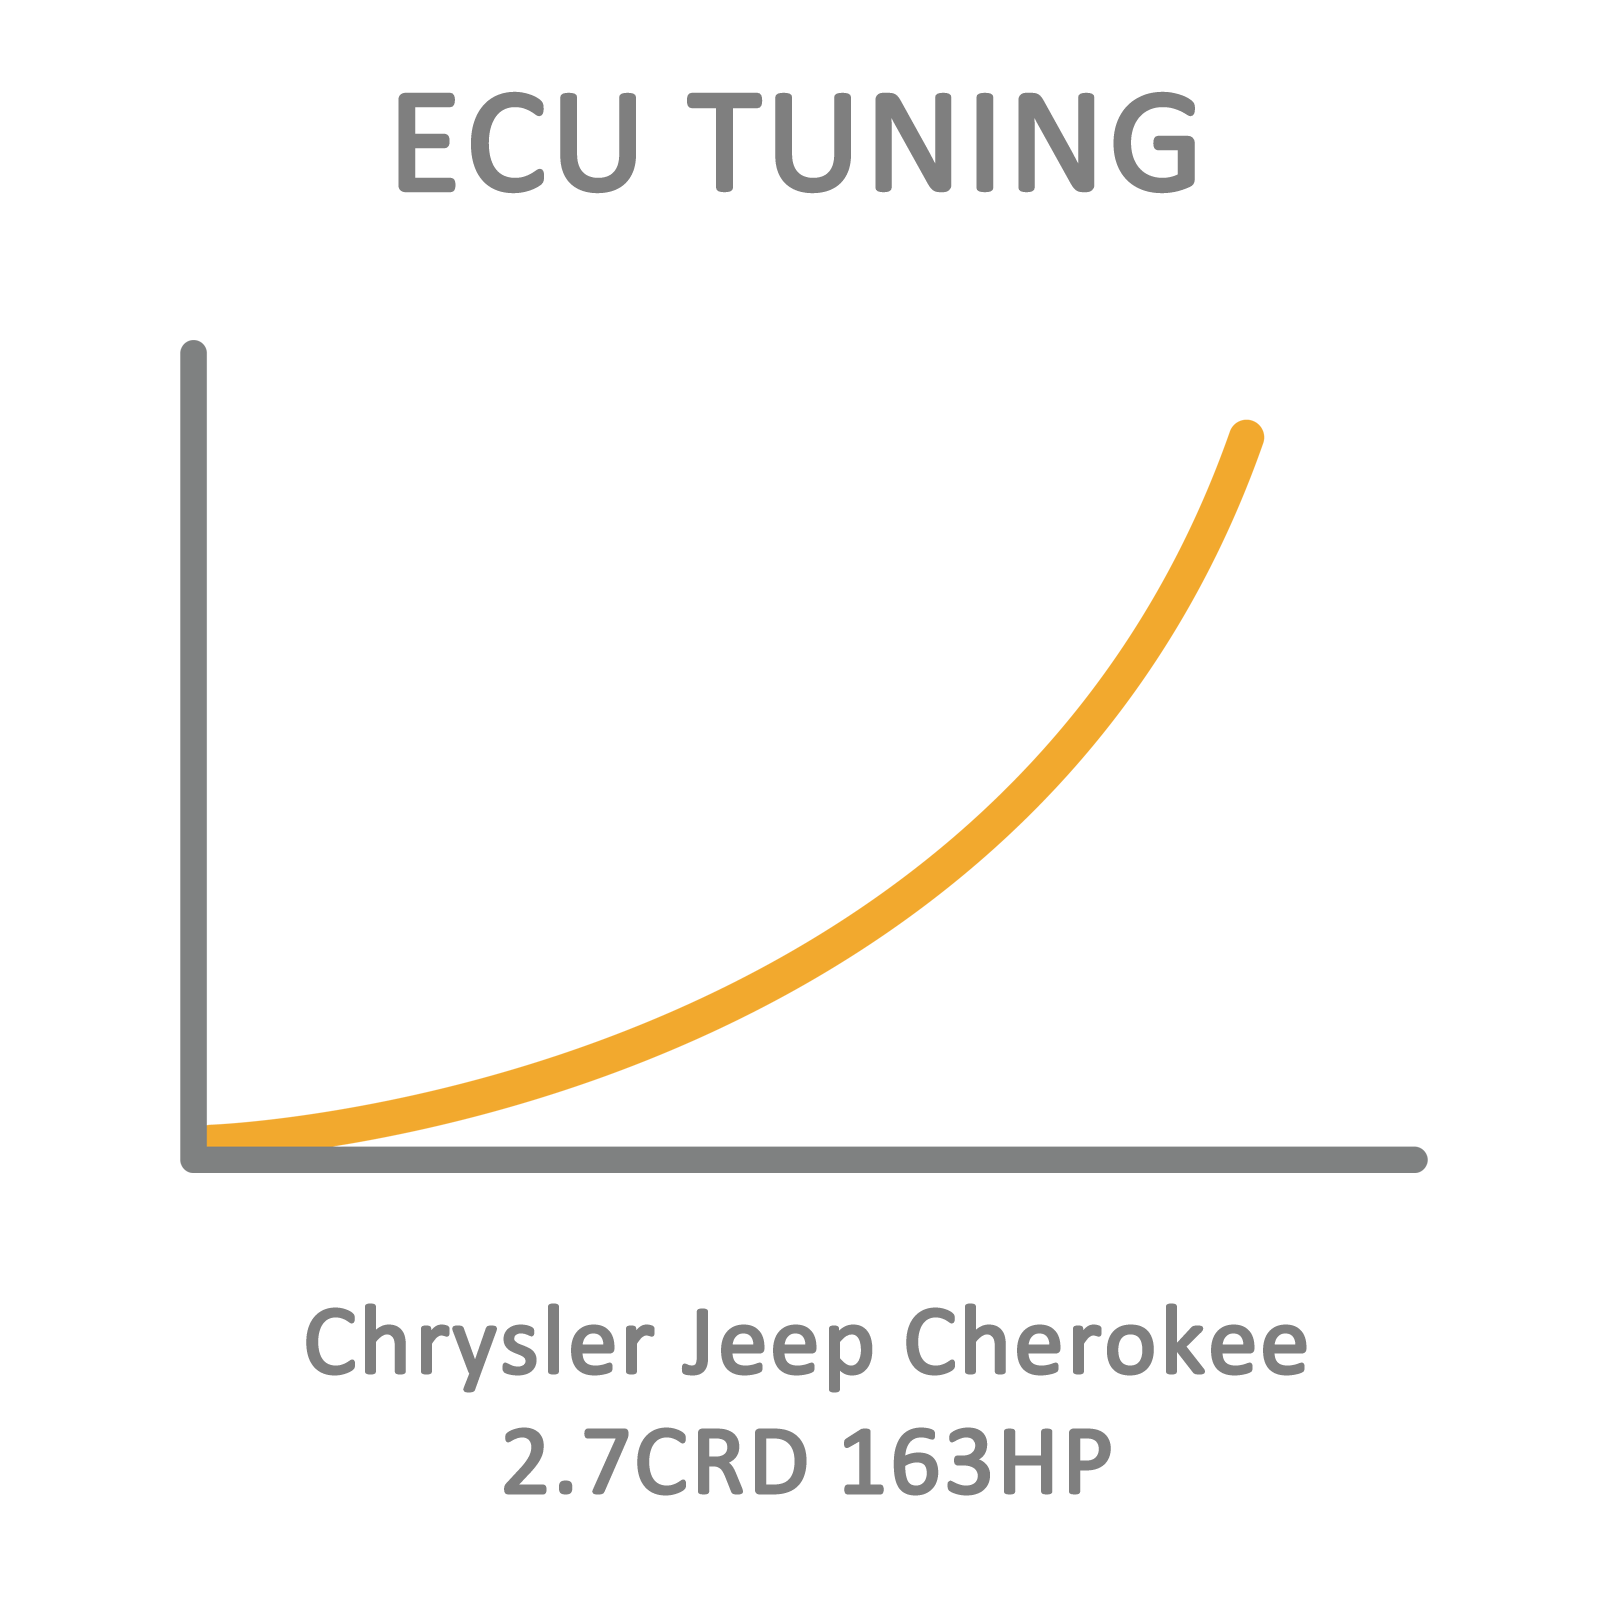 Chrysler Jeep Cherokee 2.7CRD 163HP ECU Tuning Remapping